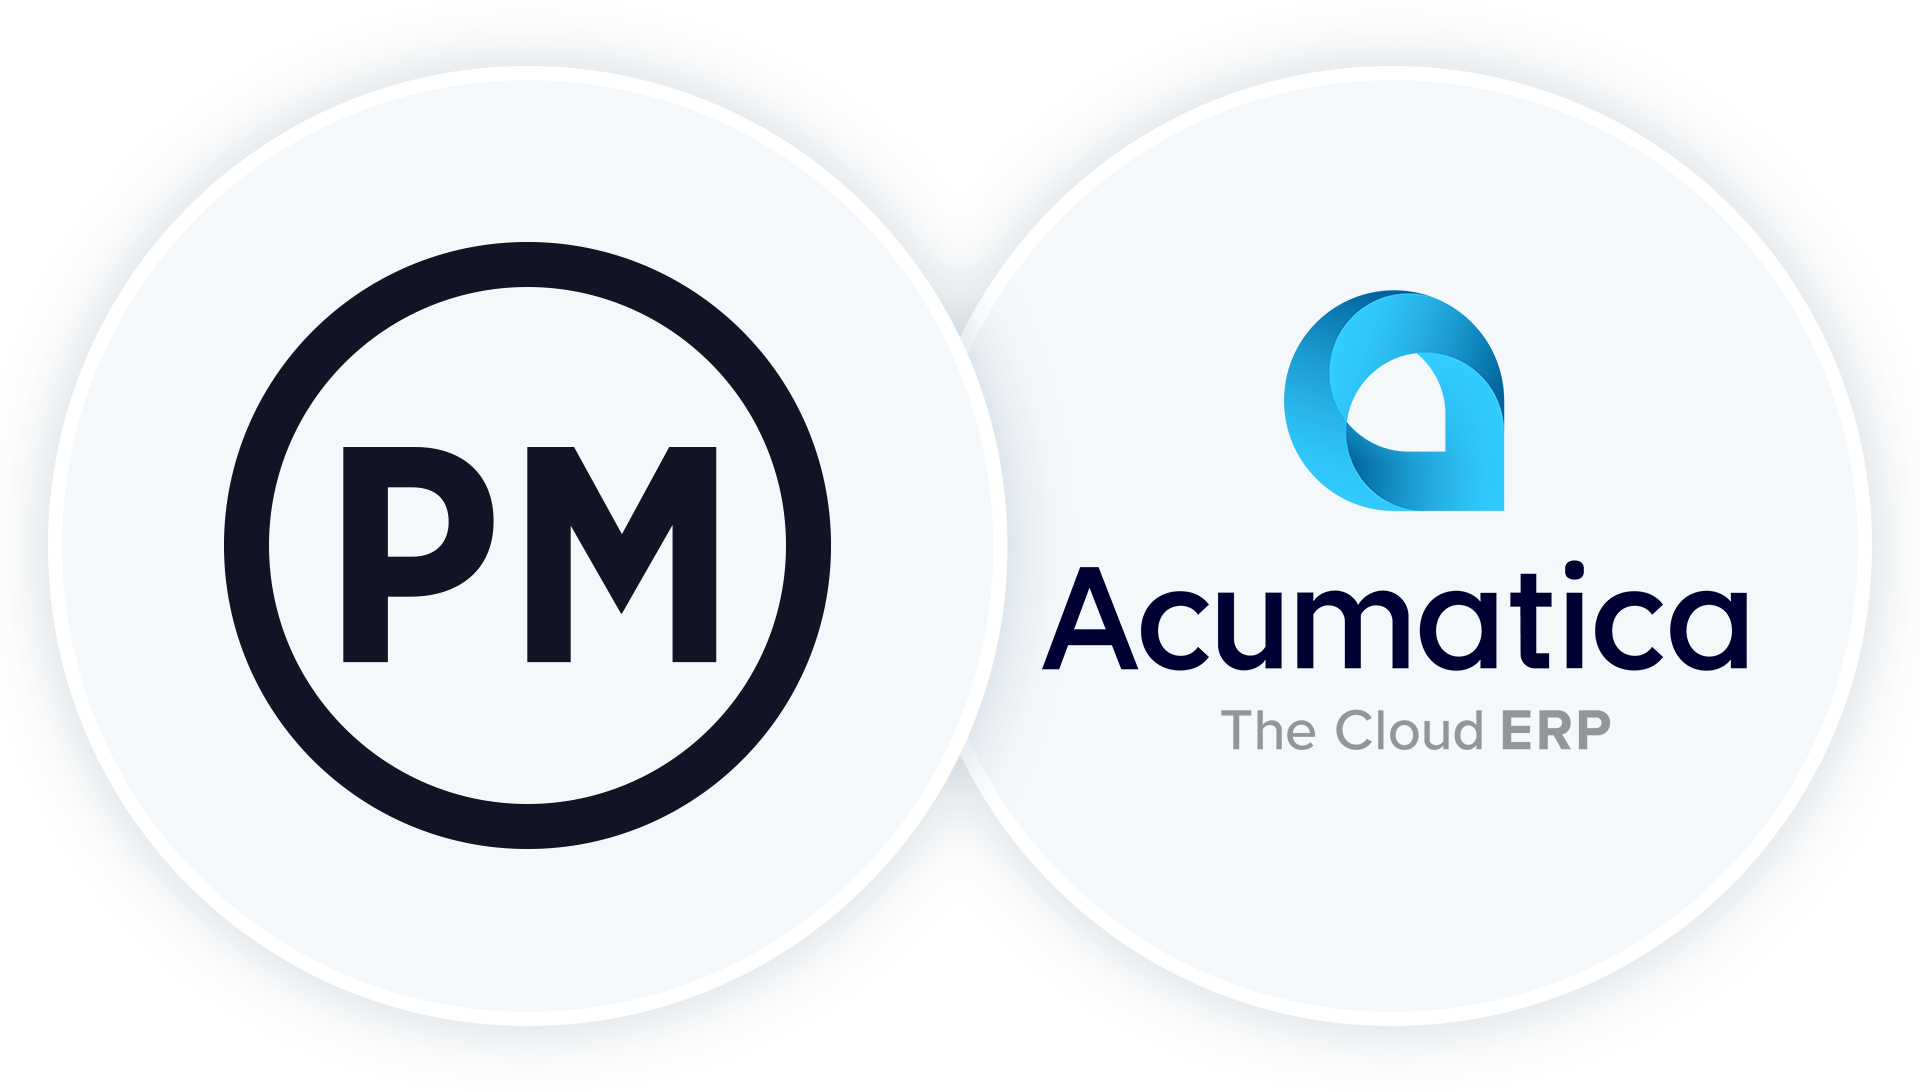 ProjectManager and Acumatica logos side by side